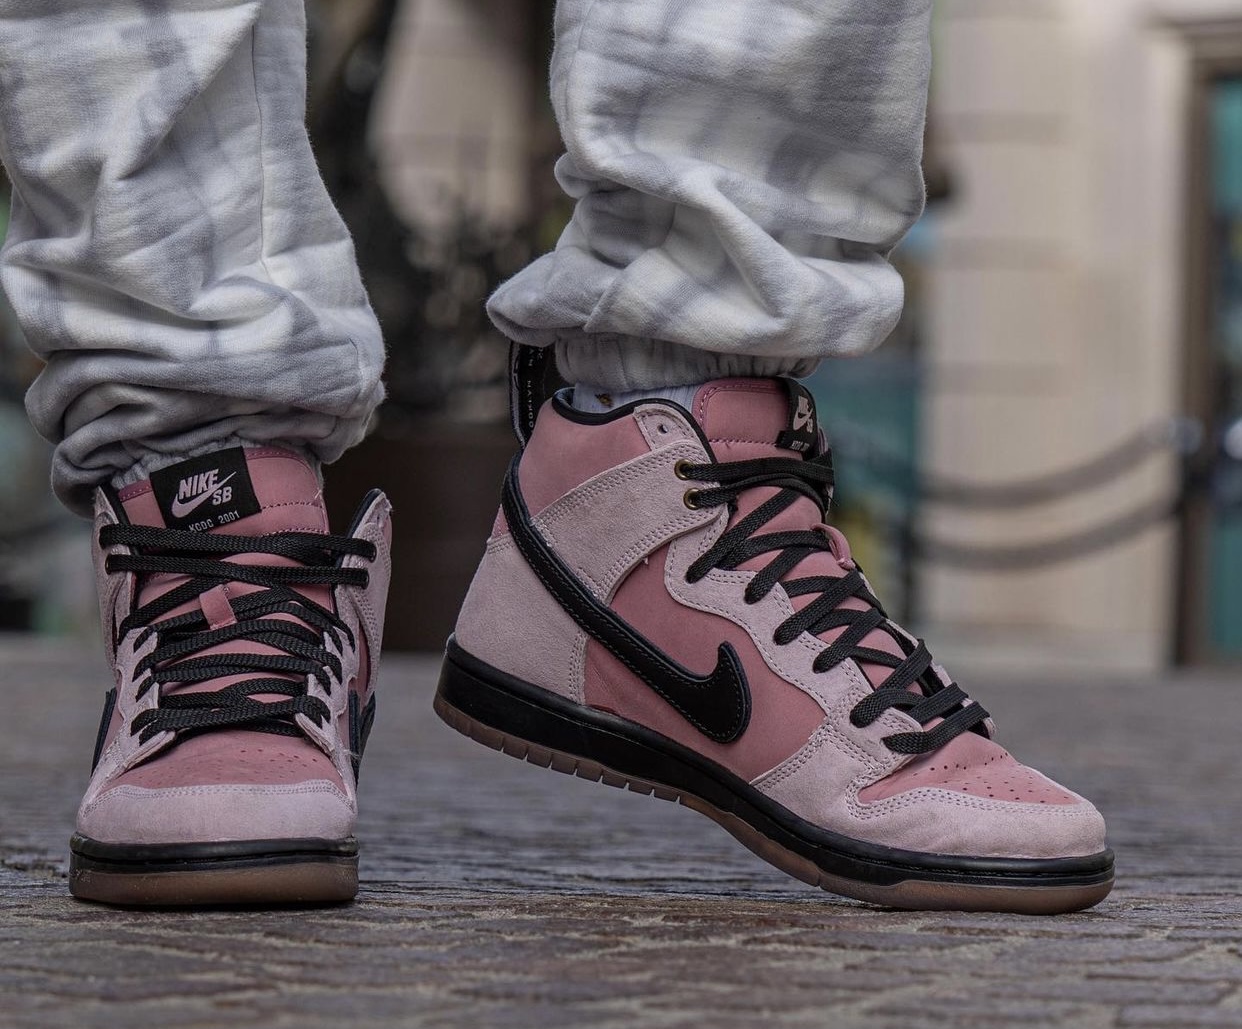 KCDC Nike SB Dunk High DH7742 600 Release Date On Feet 7